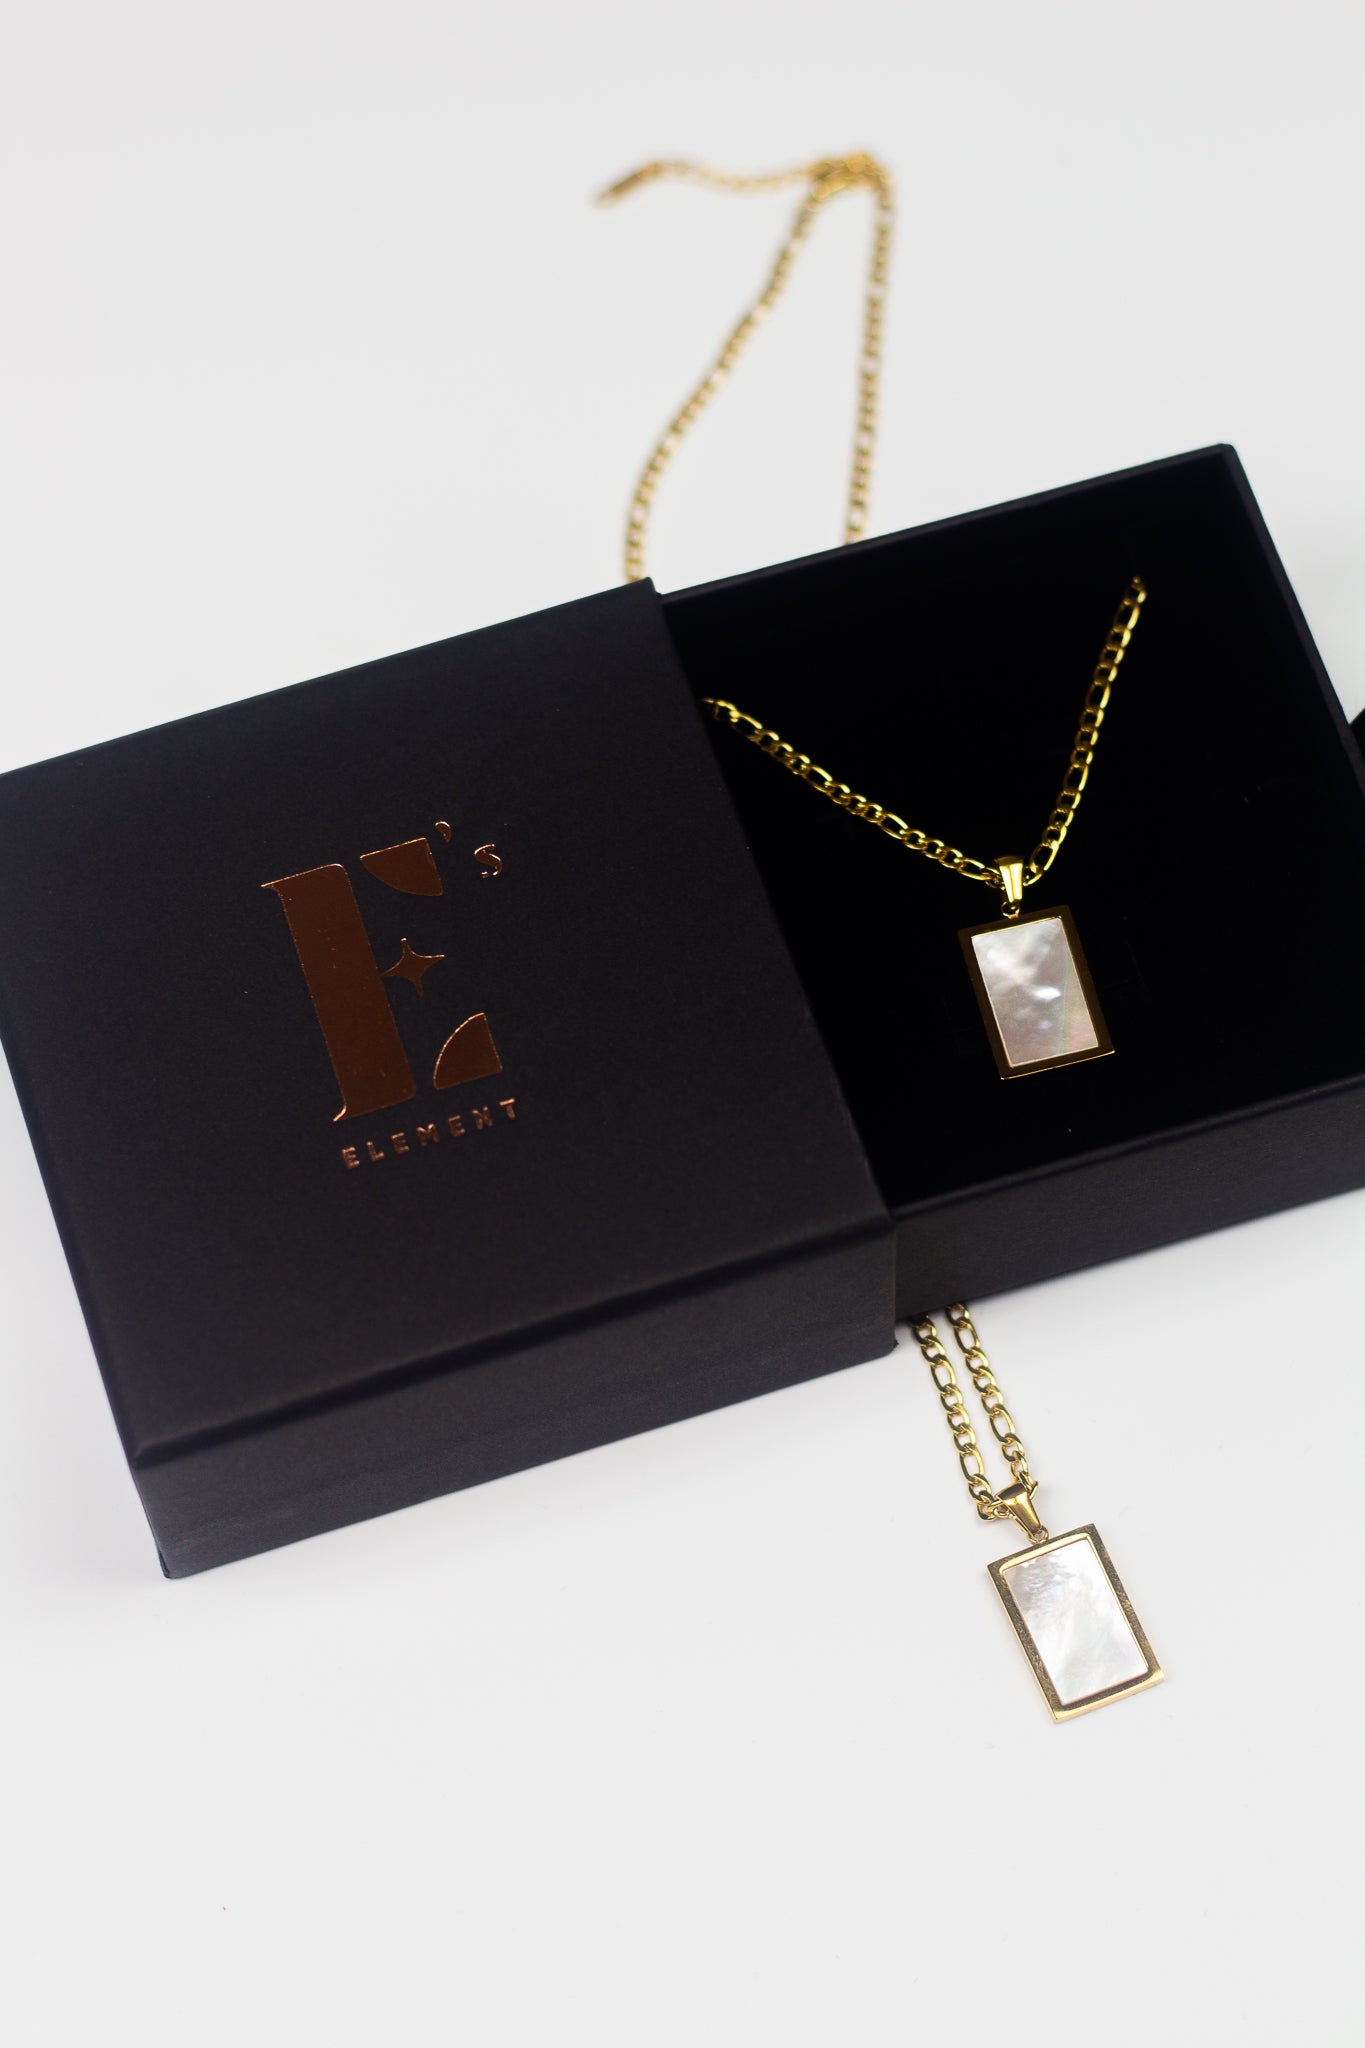 18k gold necklace with a white rectangular charm placed in its container. On the left is the cap for the container with the E's Element imprinted in gold. The Infinity Zircon Necklace by E's Element.